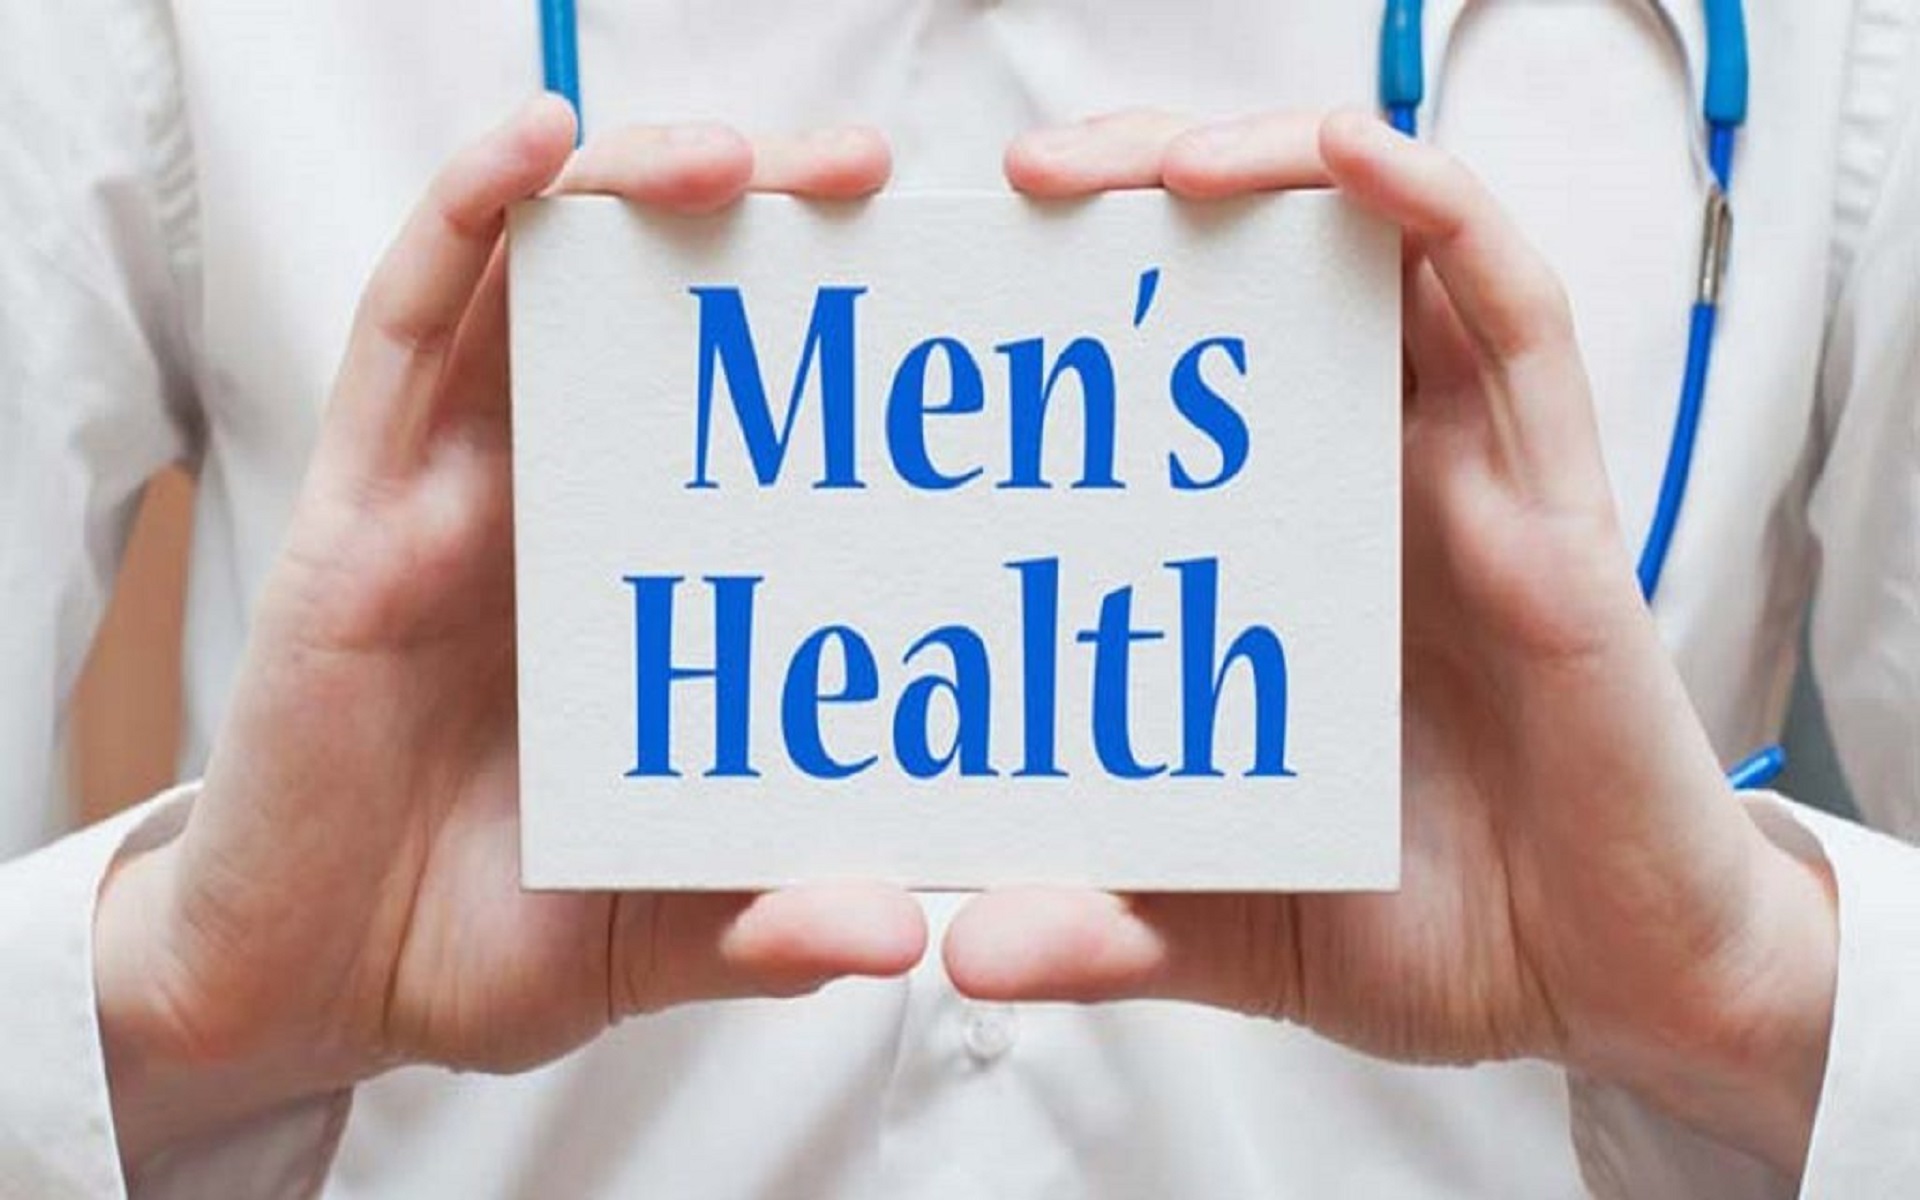 Why Is Men’s Health Not Given Much Importance